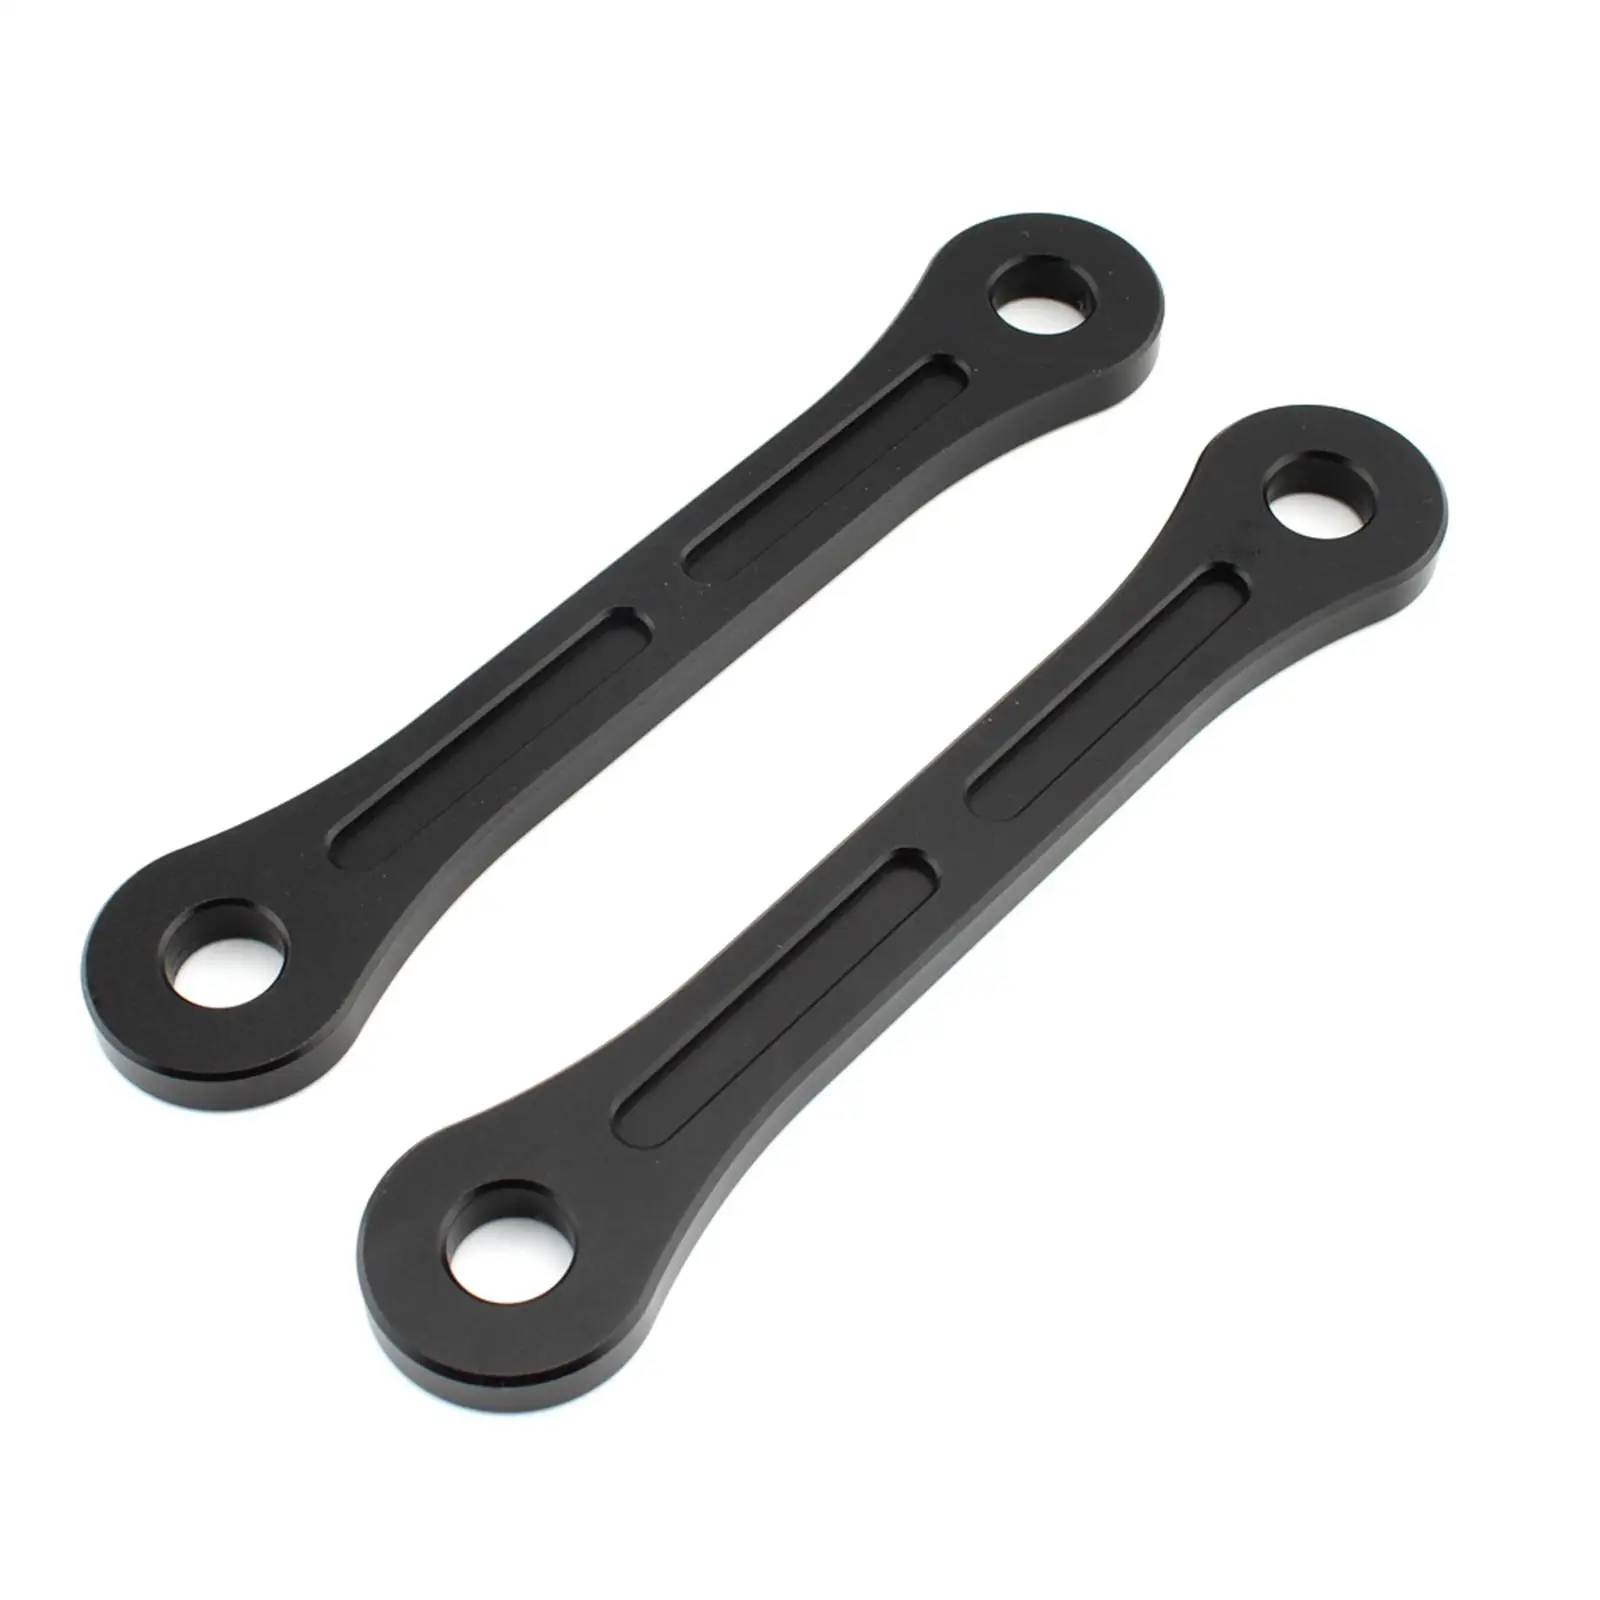 2 Pieces Motorcycle Lowering Link Durable Reinforced Dog Bones for Suzuki GSX1300R 1999-2022 Hayabusa Replaces Modification